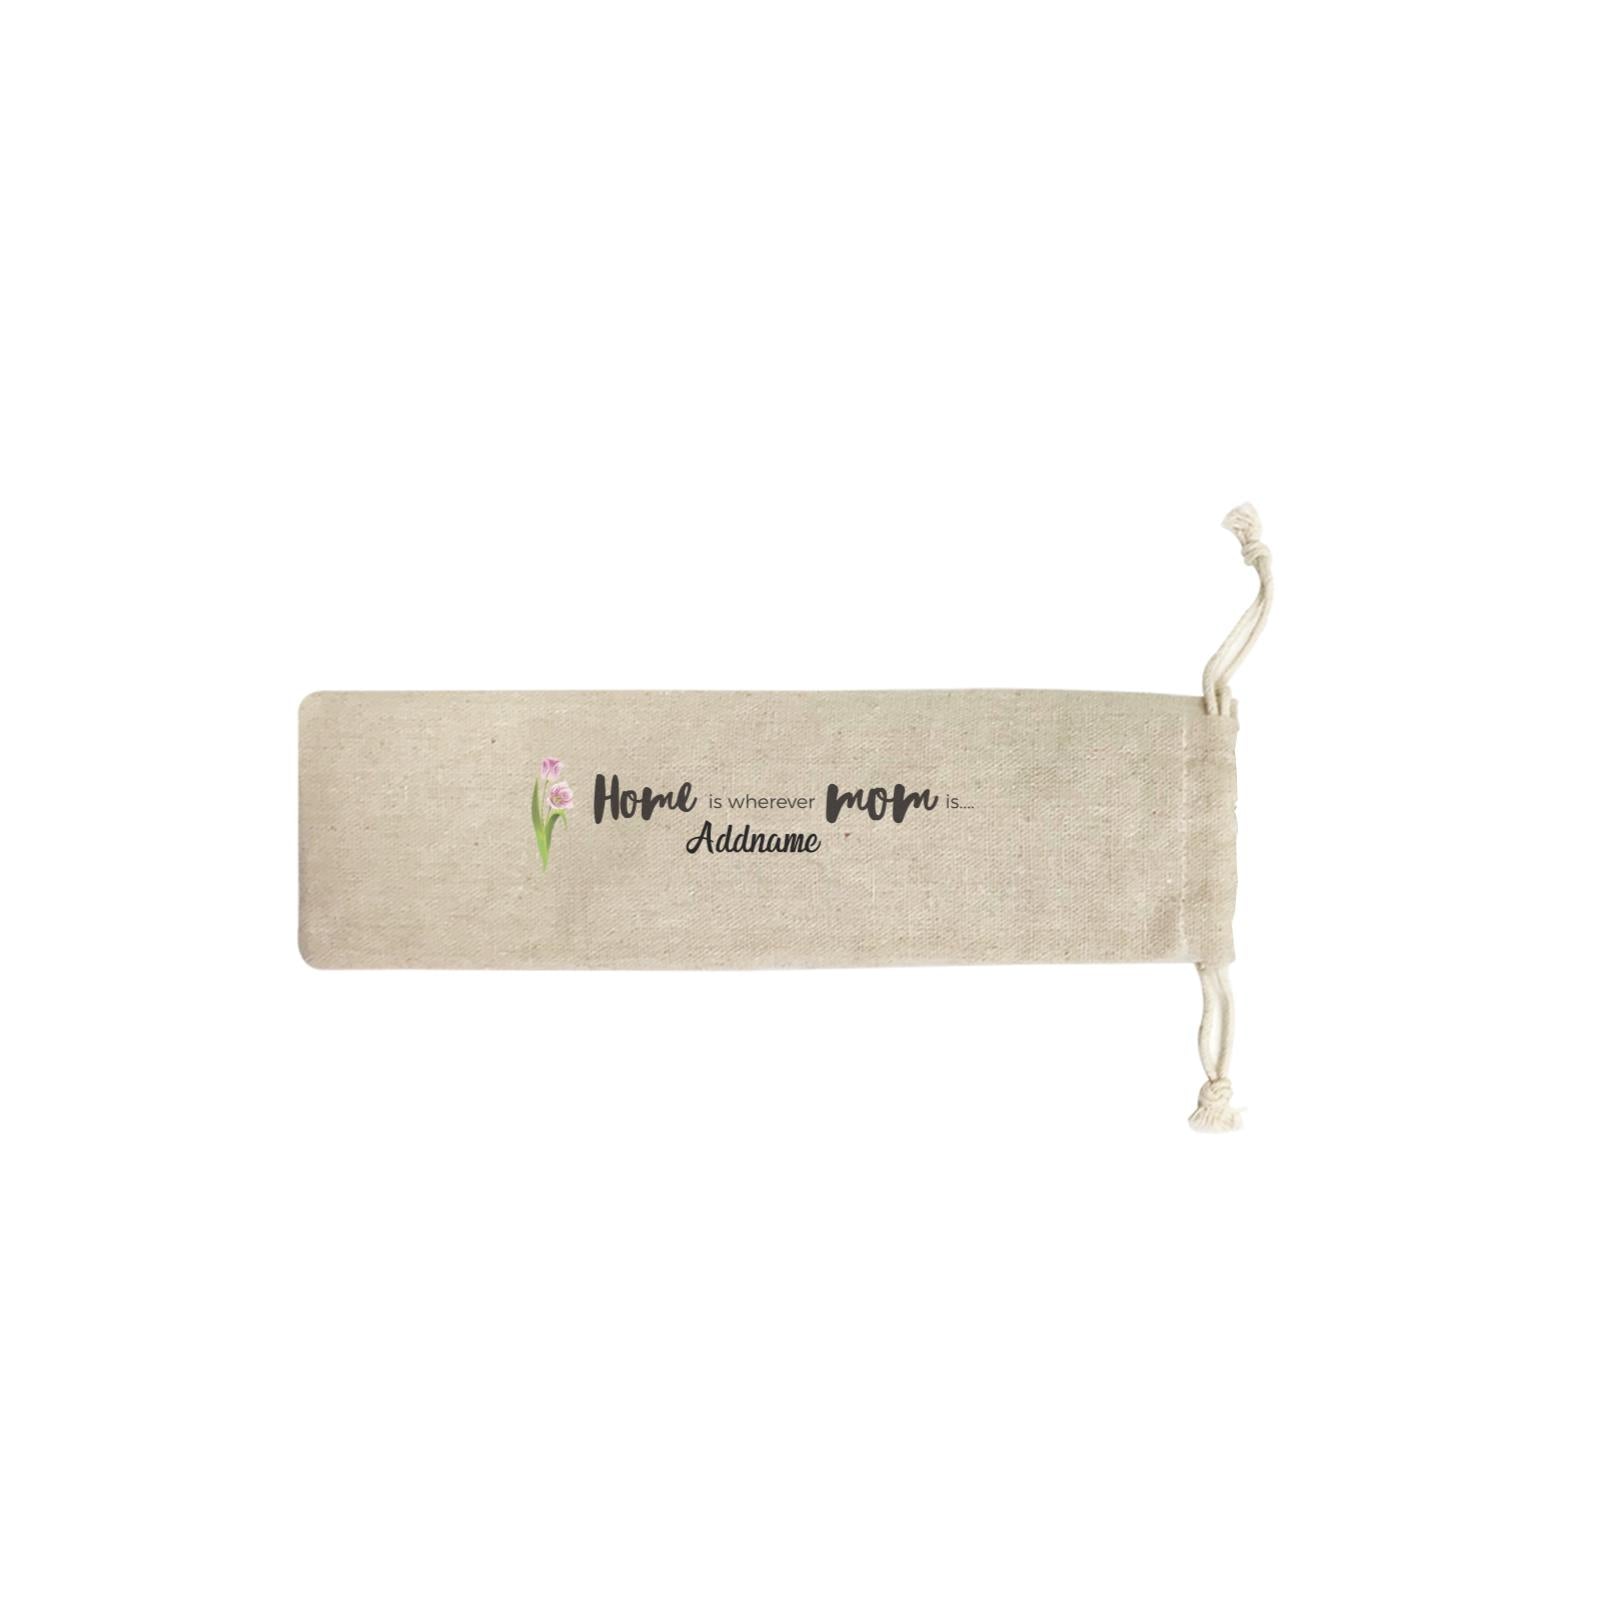 Sweet Mom Quotes 1 Tulip Home Is Wherever Mom Is Addname SB Straw Pouch (No Straws included)